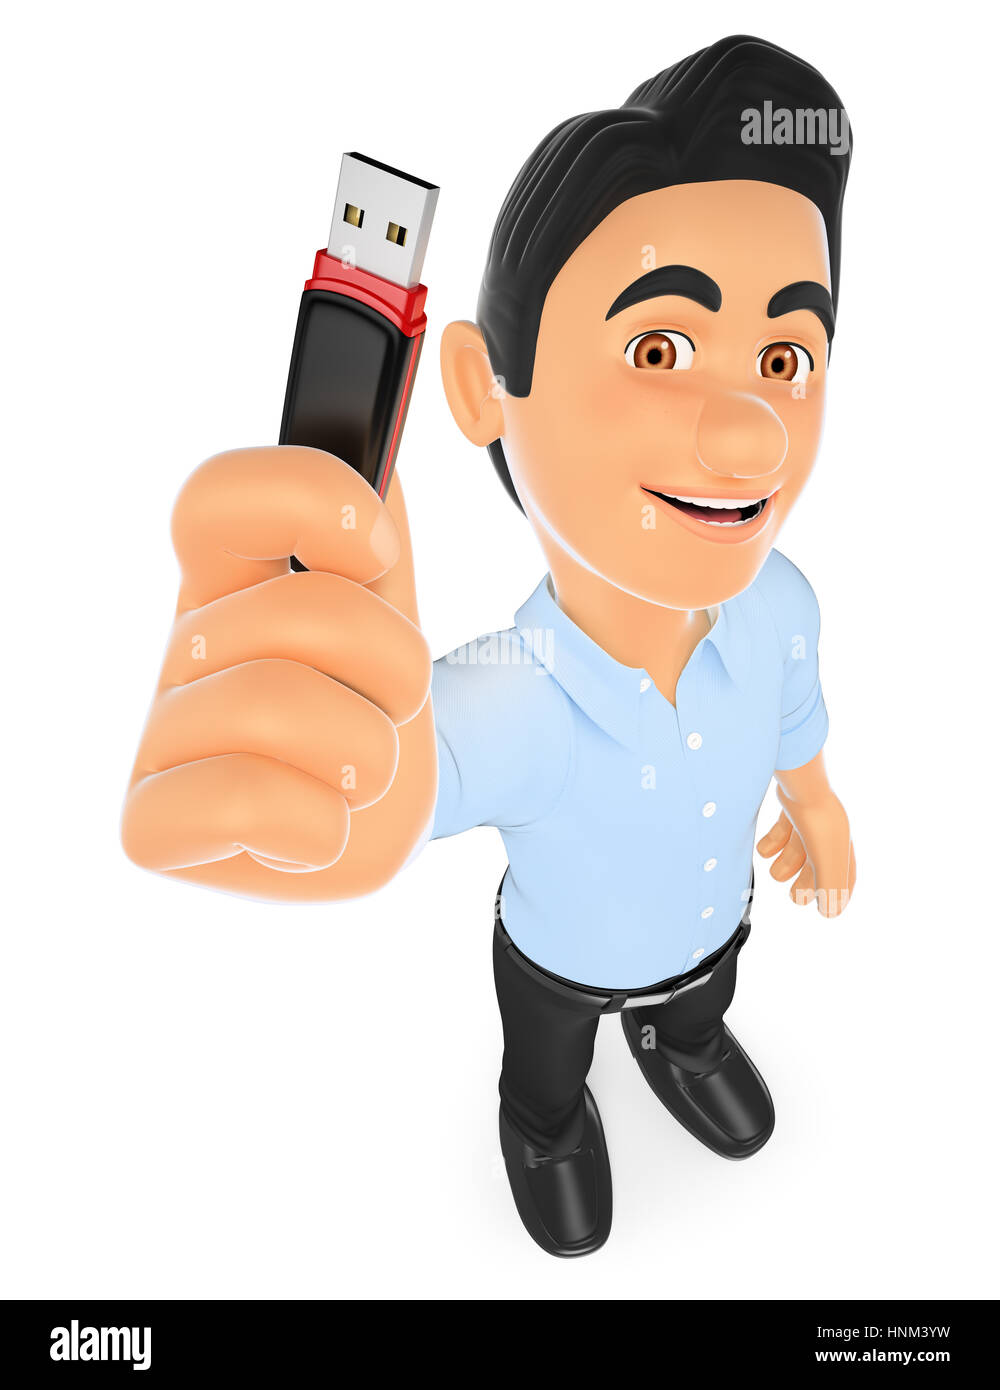 3d working people illustration. Information technology technician with a usb memory stick. Isolated white background. Stock Photo